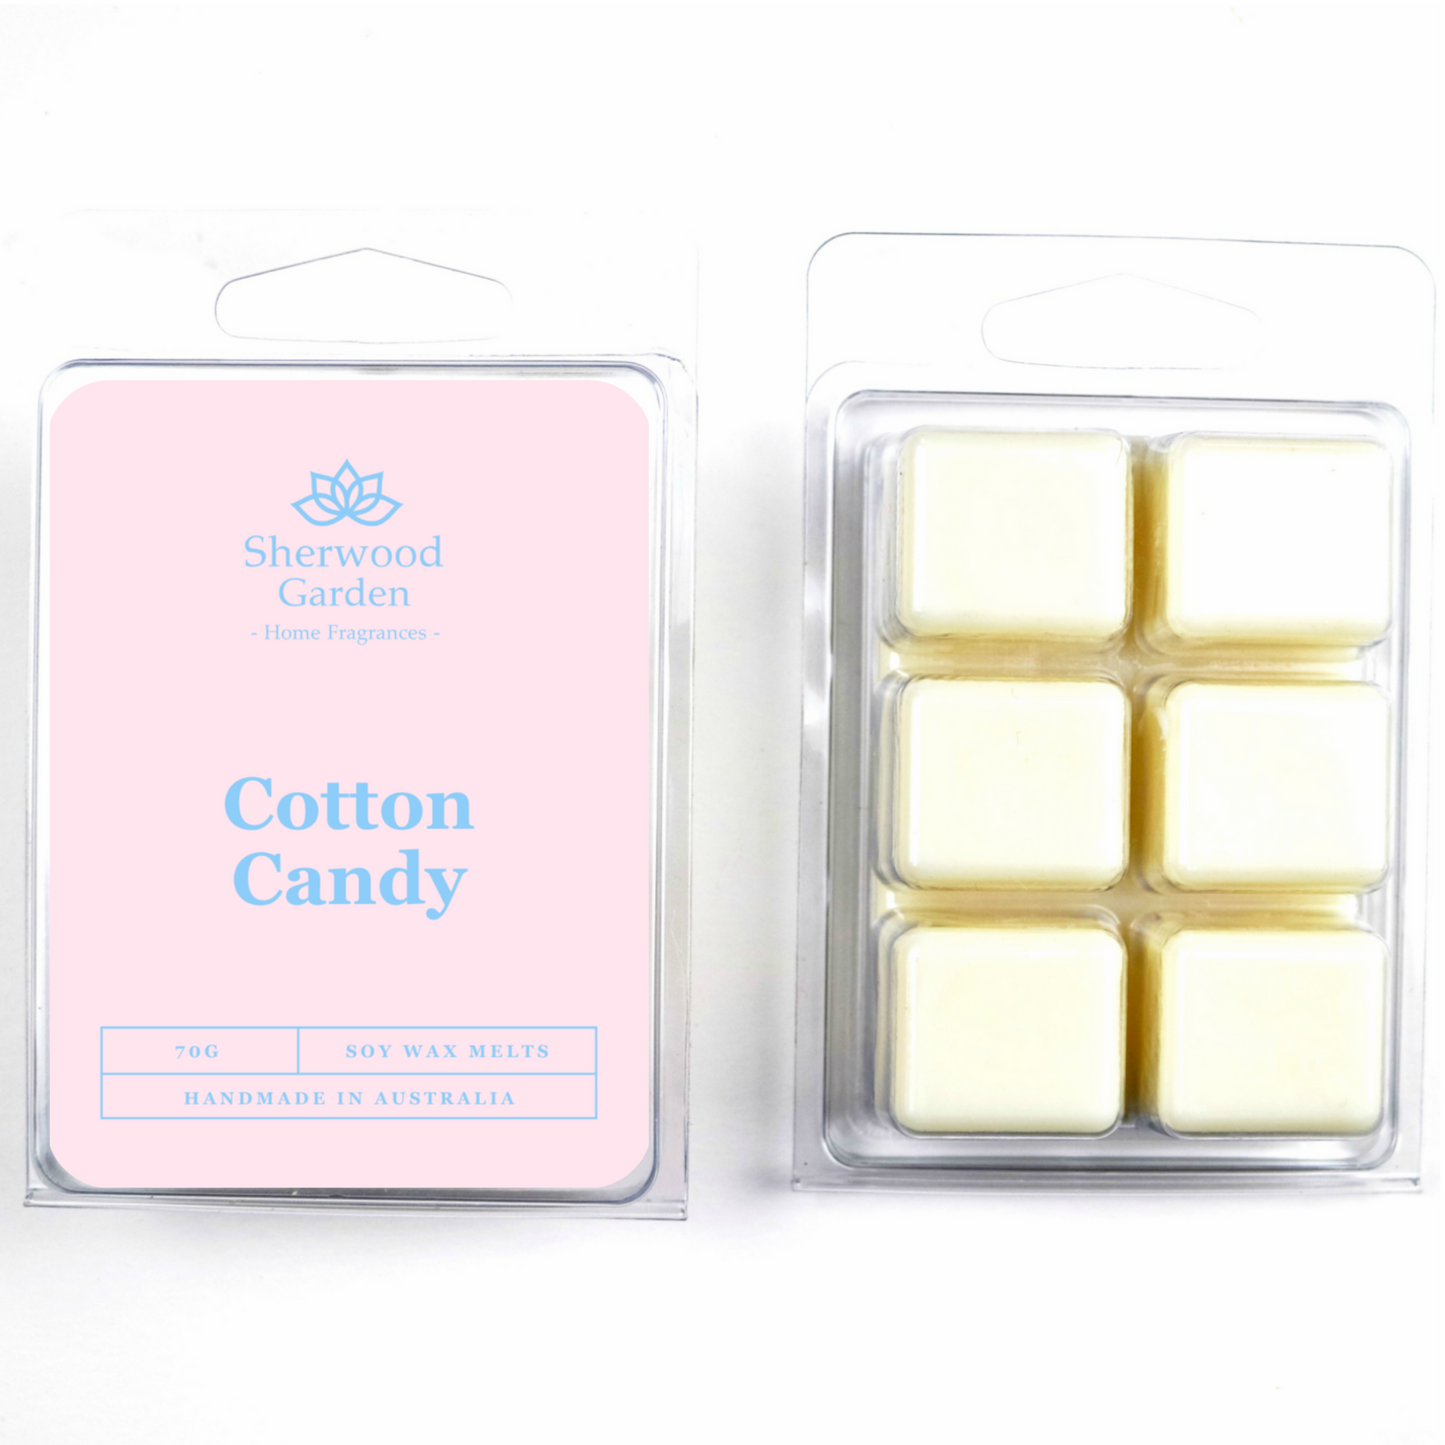 Cotton Candy Soy Wax Melts 70g